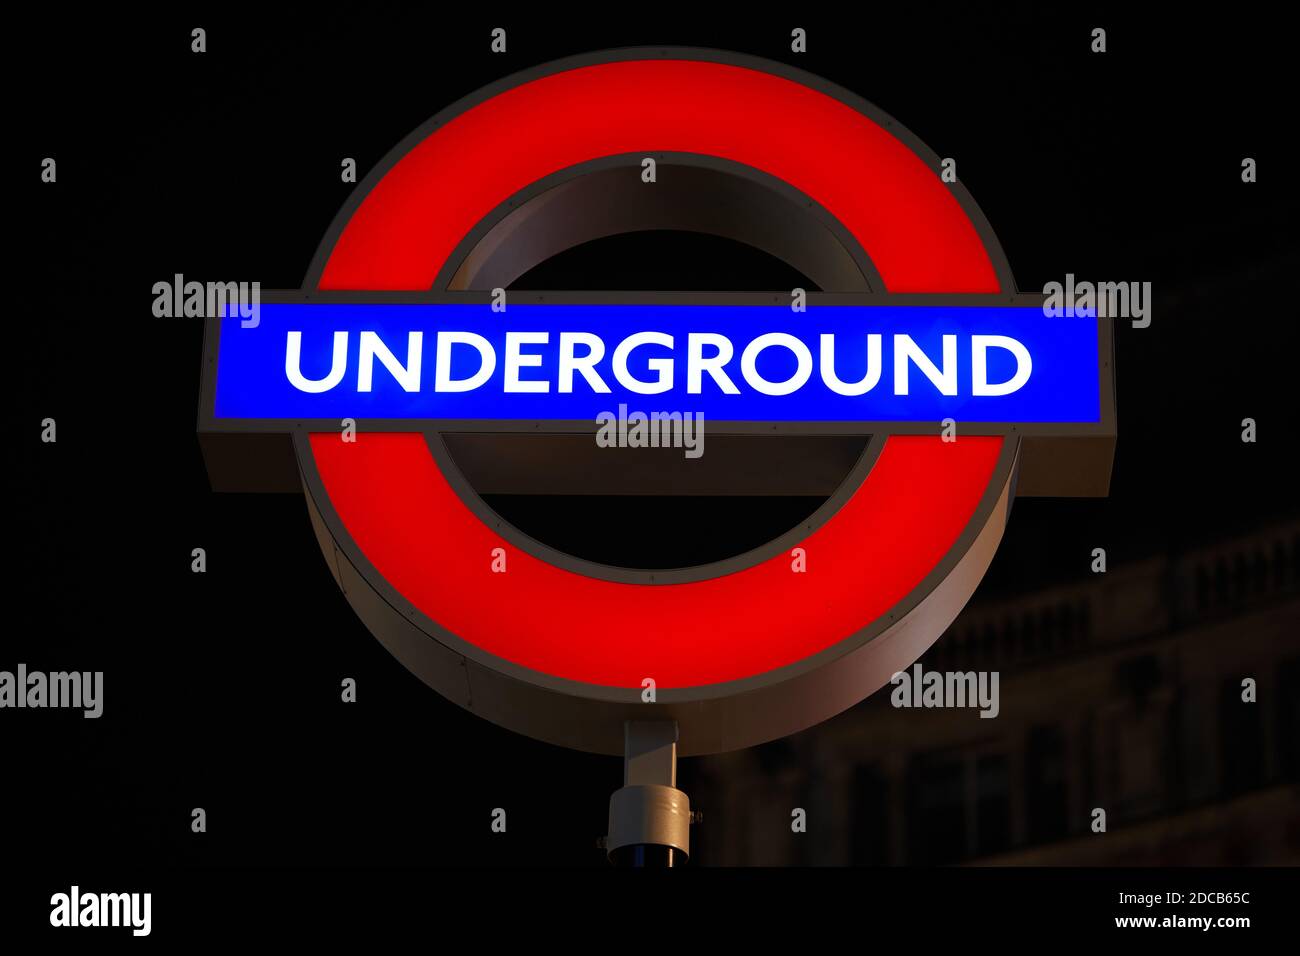 London, UK. - 19 Nov 2020: One of four illuminated PlayStation button symbols installed at Oxford Circus tube stations in a deal between Sony and Transport for London to promote the new launch of the PS5 in the U.K. Stock Photo